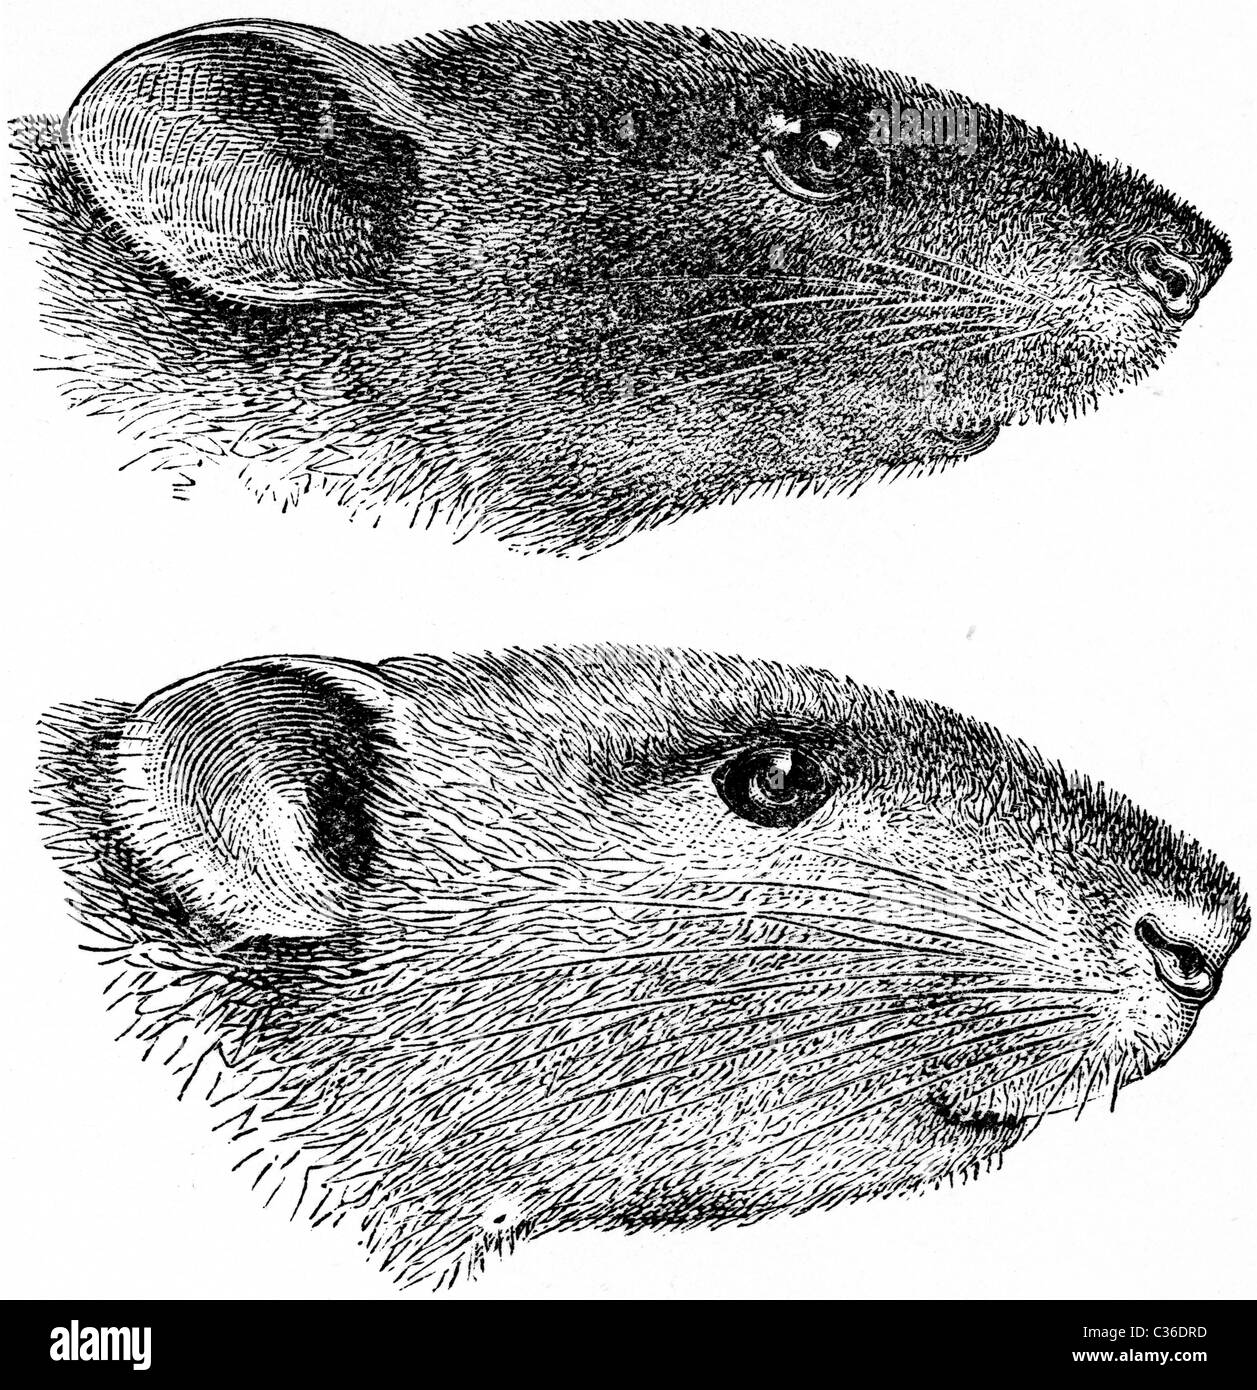 19th Century book illustration, taken from 9th edition (1875) of Encyclopaedia Britannica, of Black-Brown Rat Stock Photo